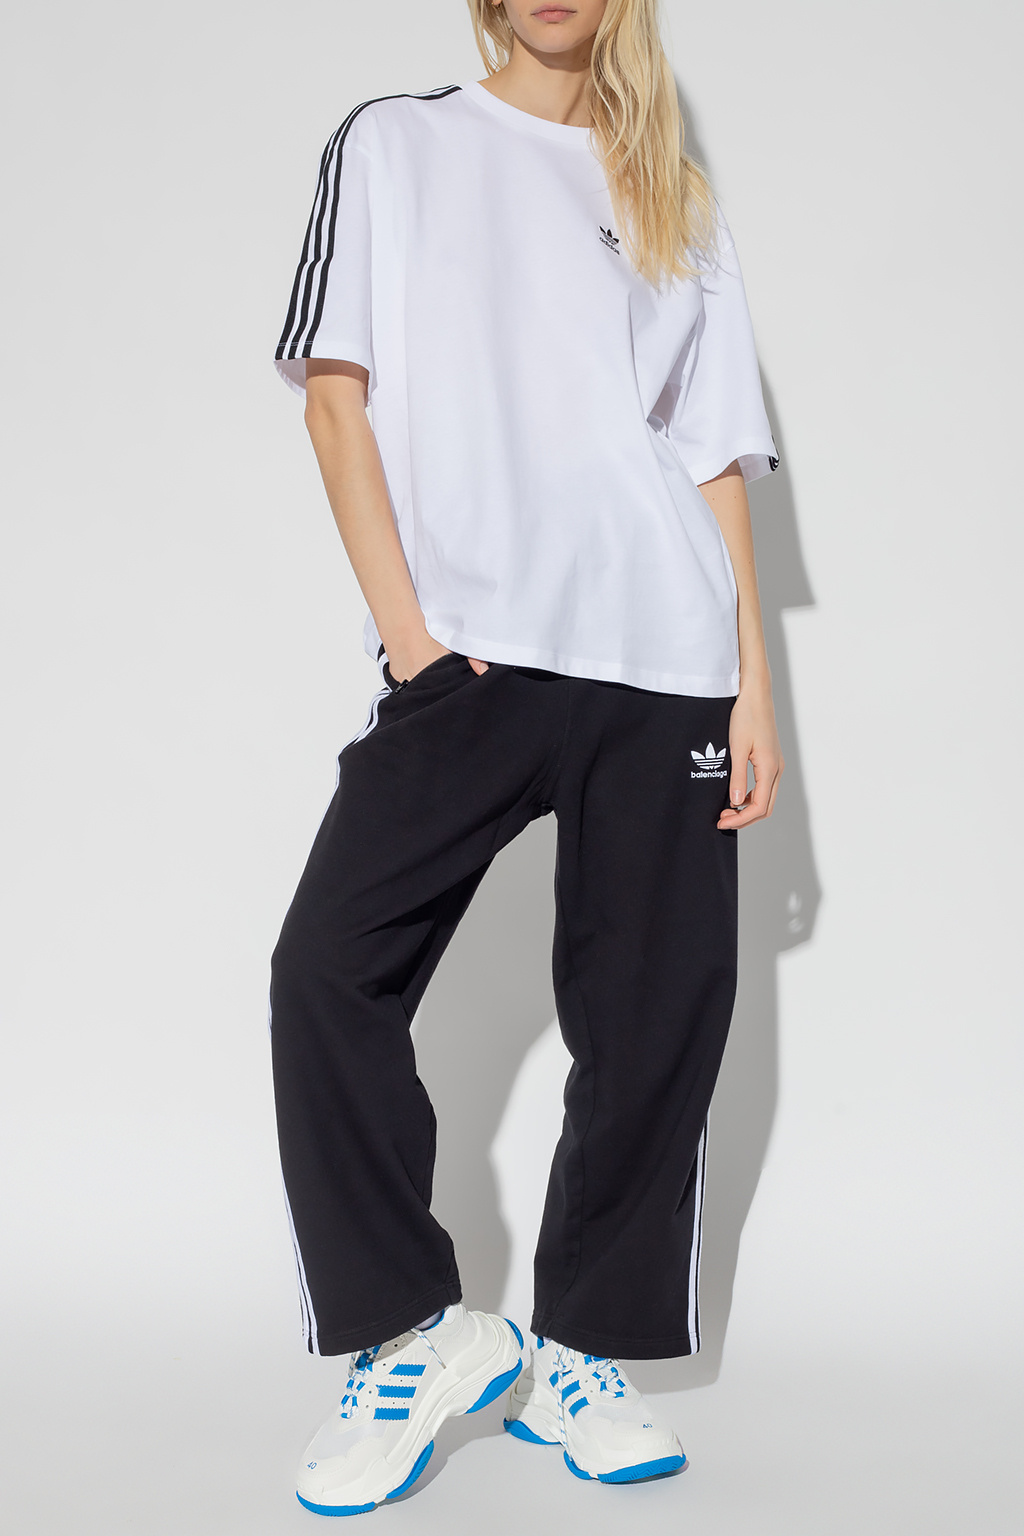 Adidas Vintage Tracksuit Pants Size XS - clothing & accessories - by owner  - apparel sale - craigslist